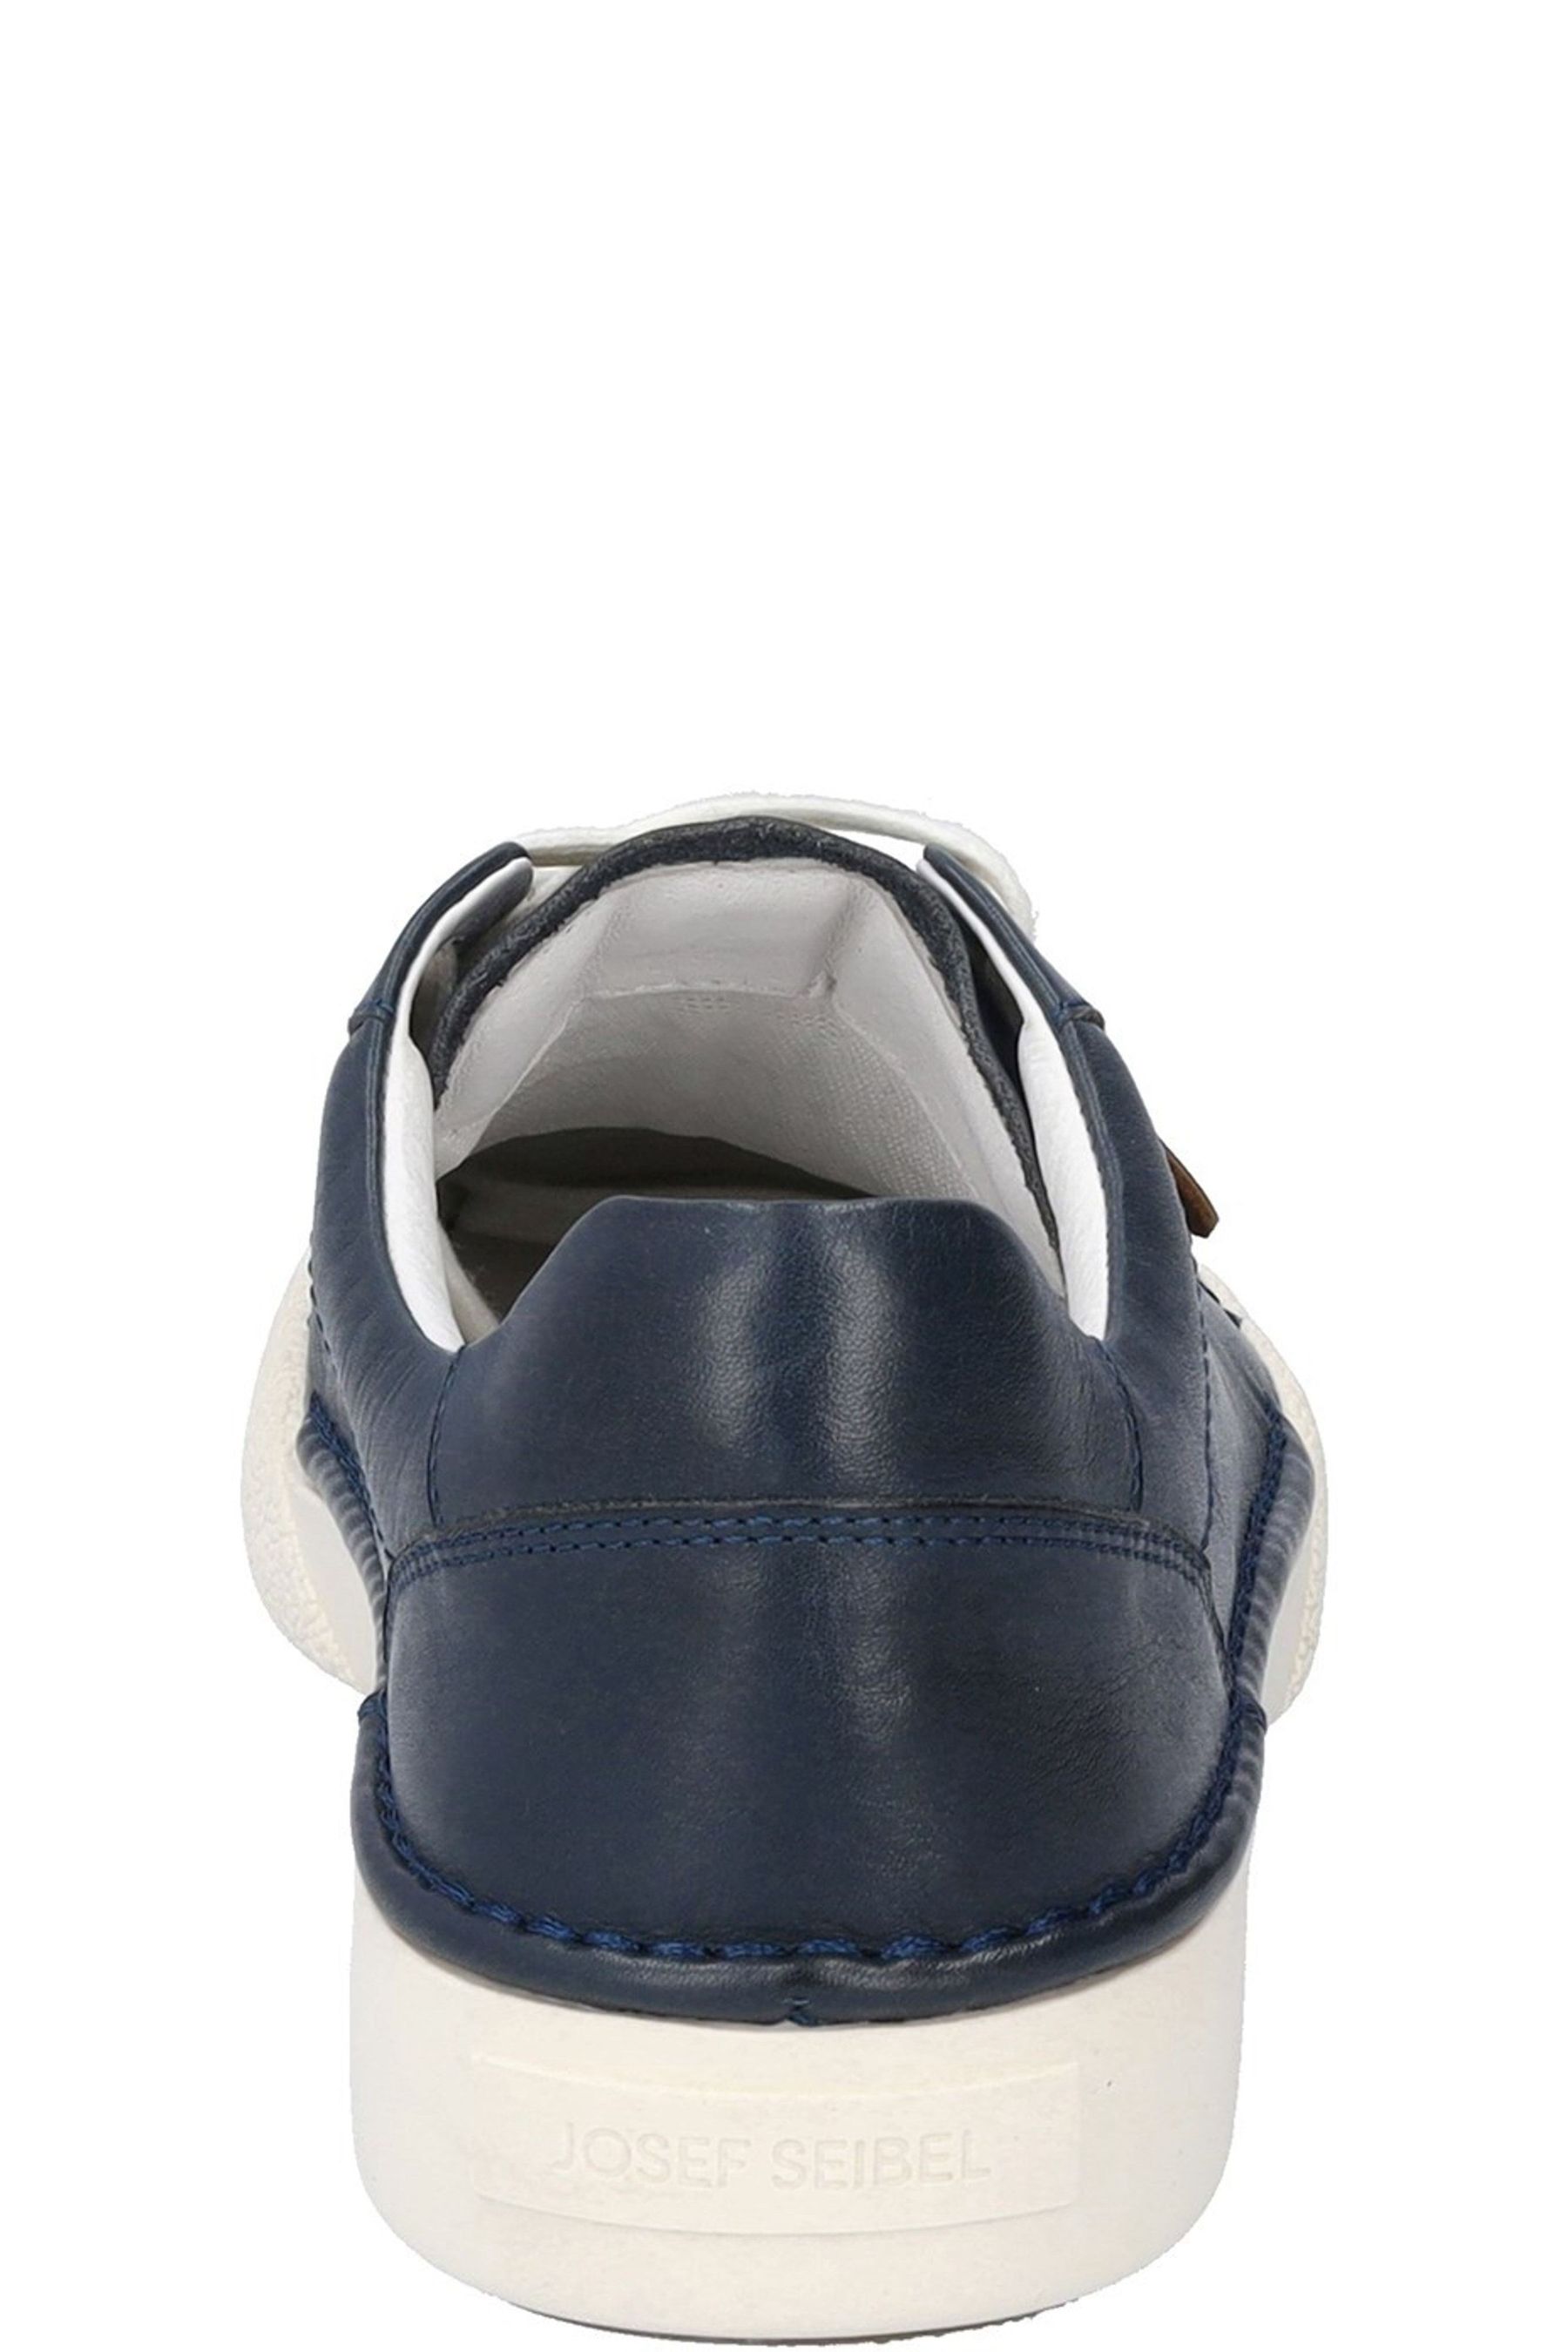 Buy Josef Seibel Blue Claire Trainers from the Next UK online shop